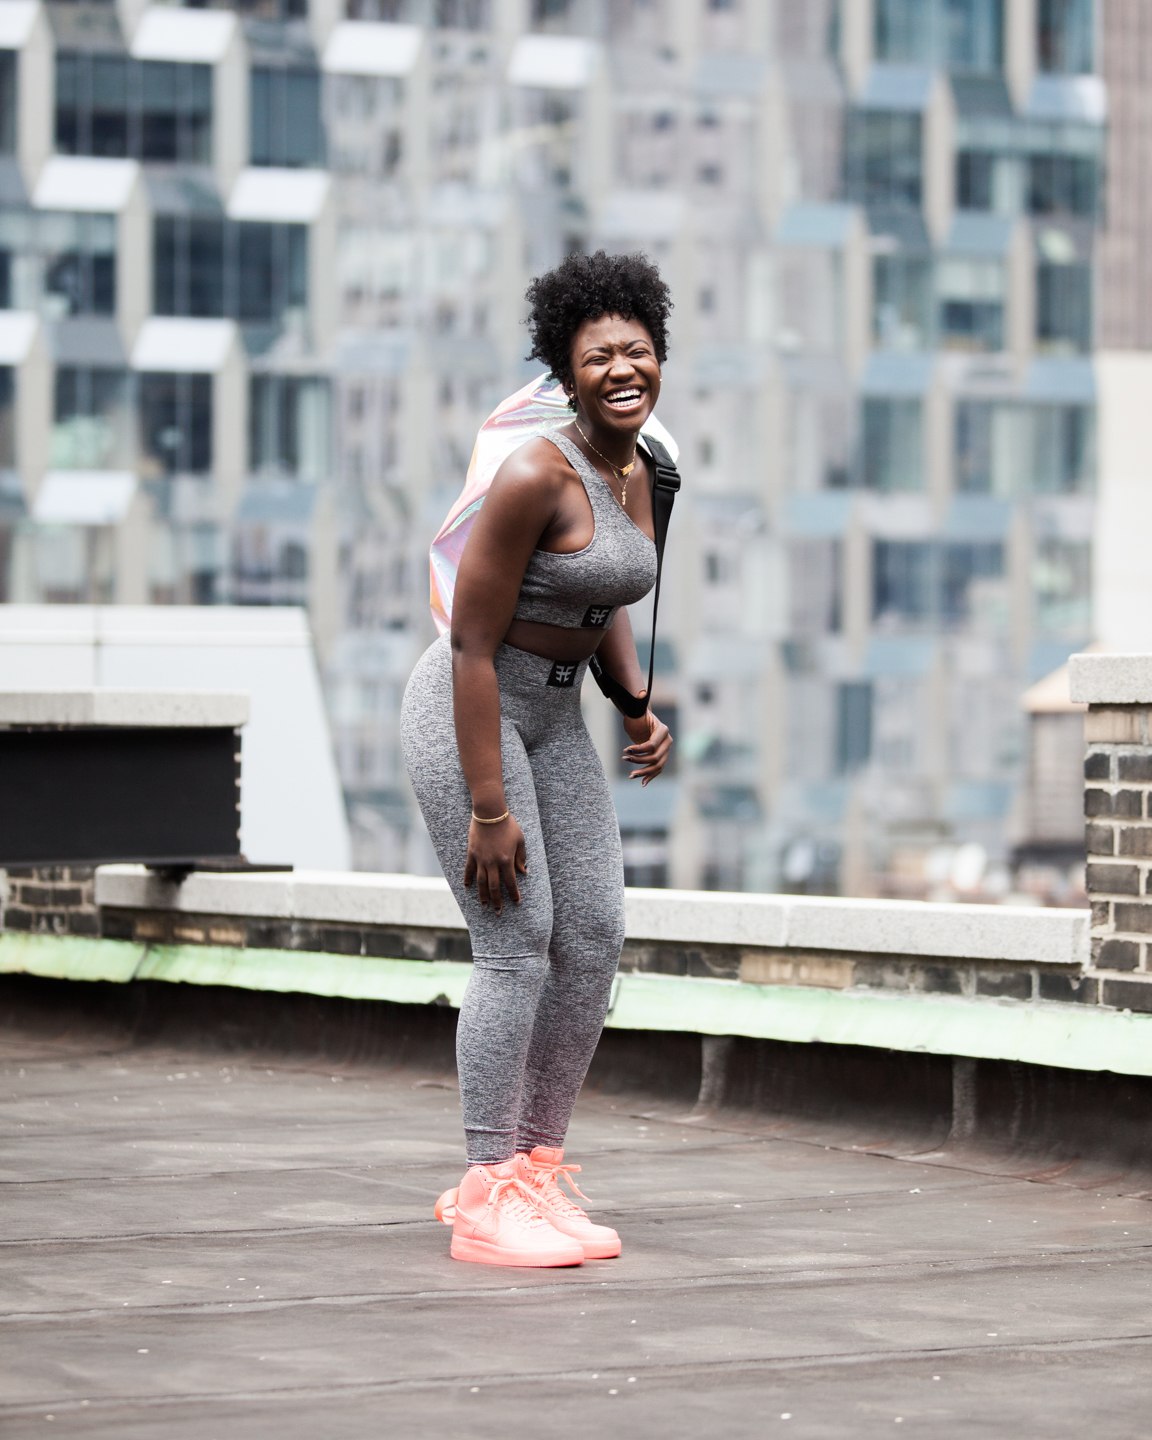 6 Awesome Ways To Take Care Of Natural Hair After The Gym 